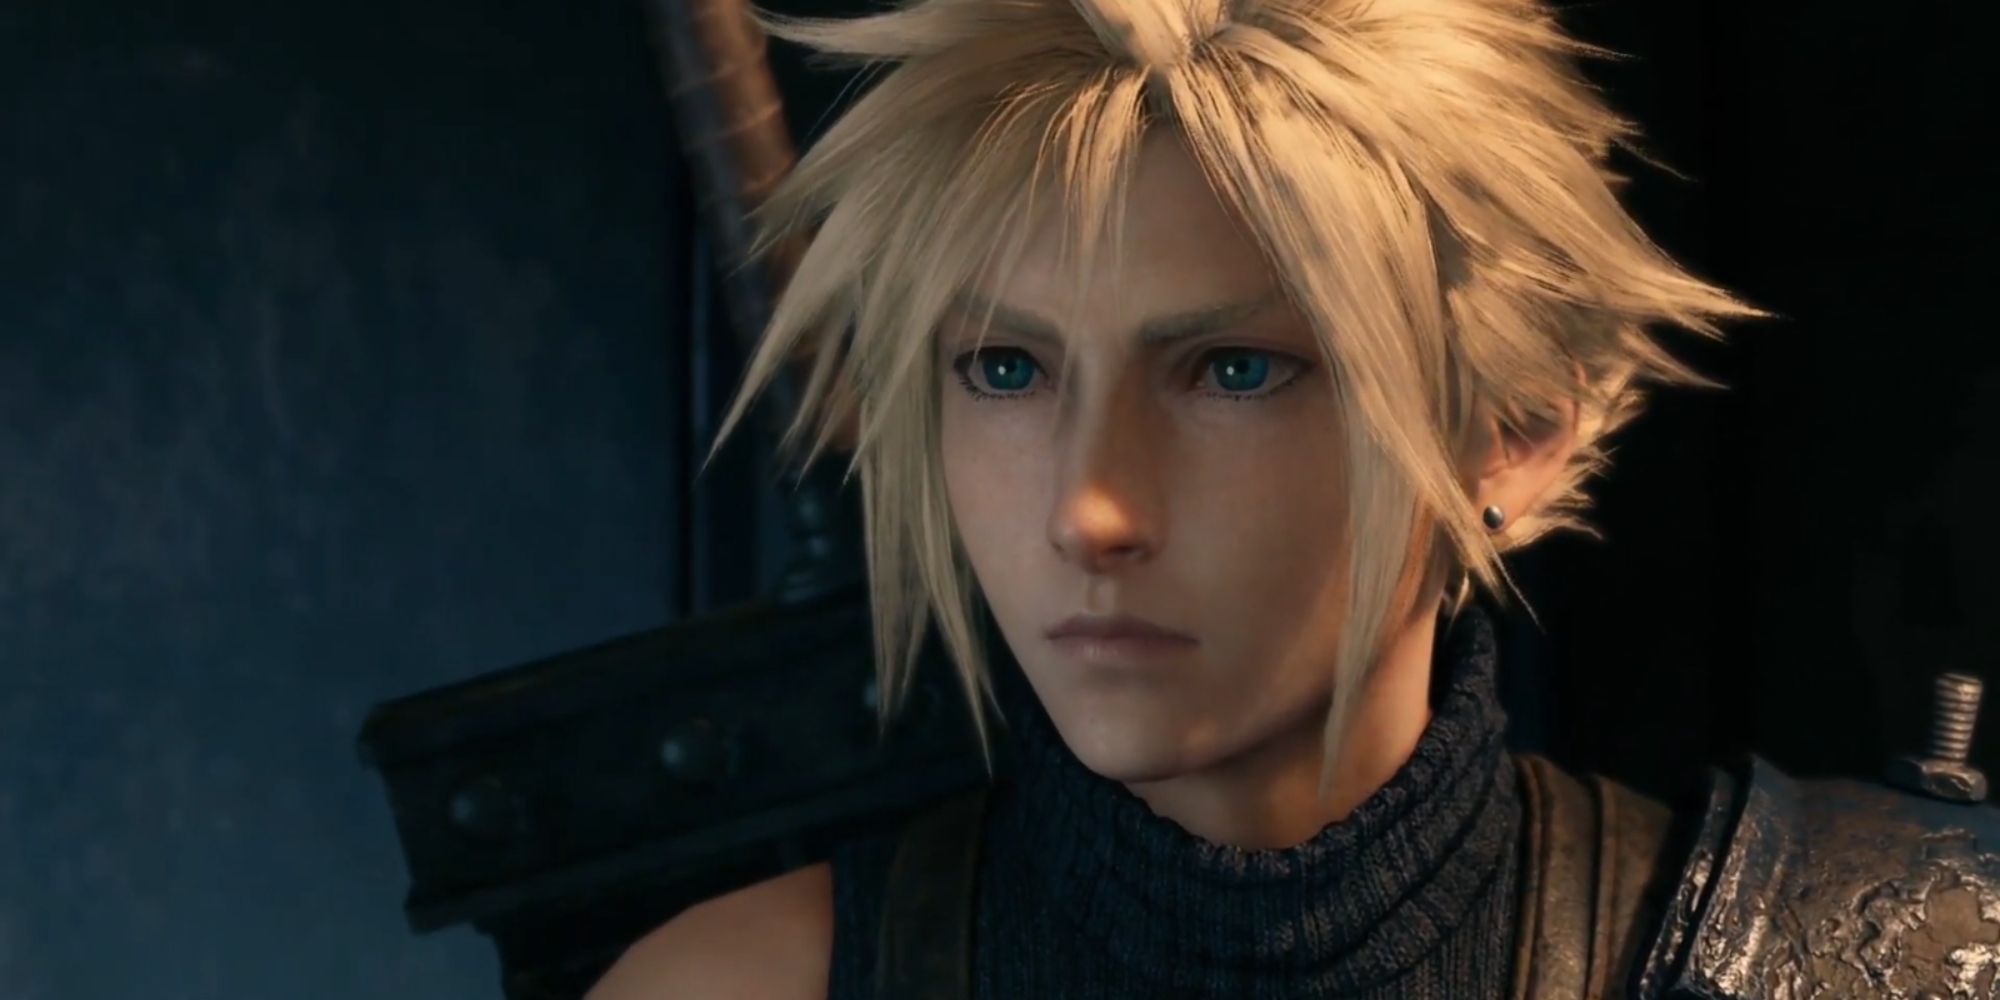 Cloud Strife with a straight face in Final Fantasy 7 Remake